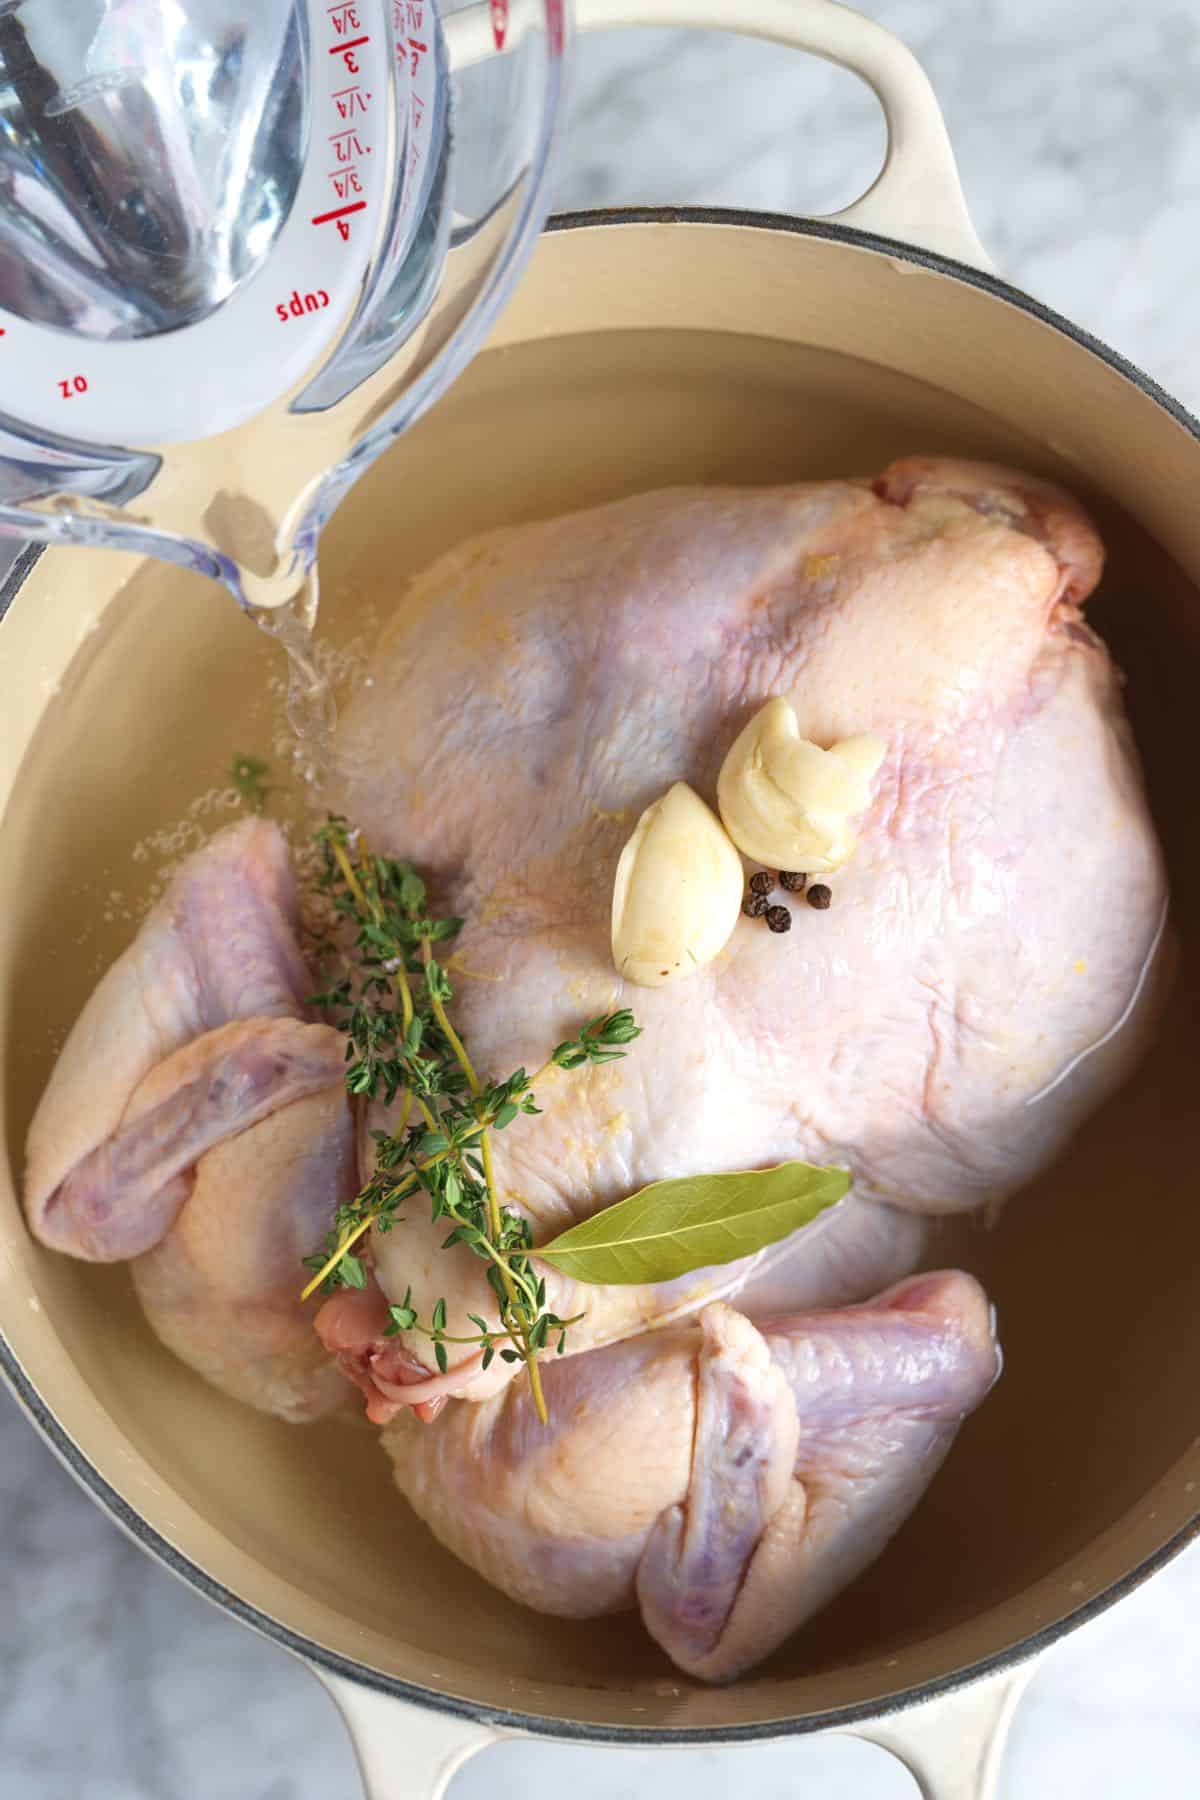 A whole chicken in a pot with garlic, herbs, and water.